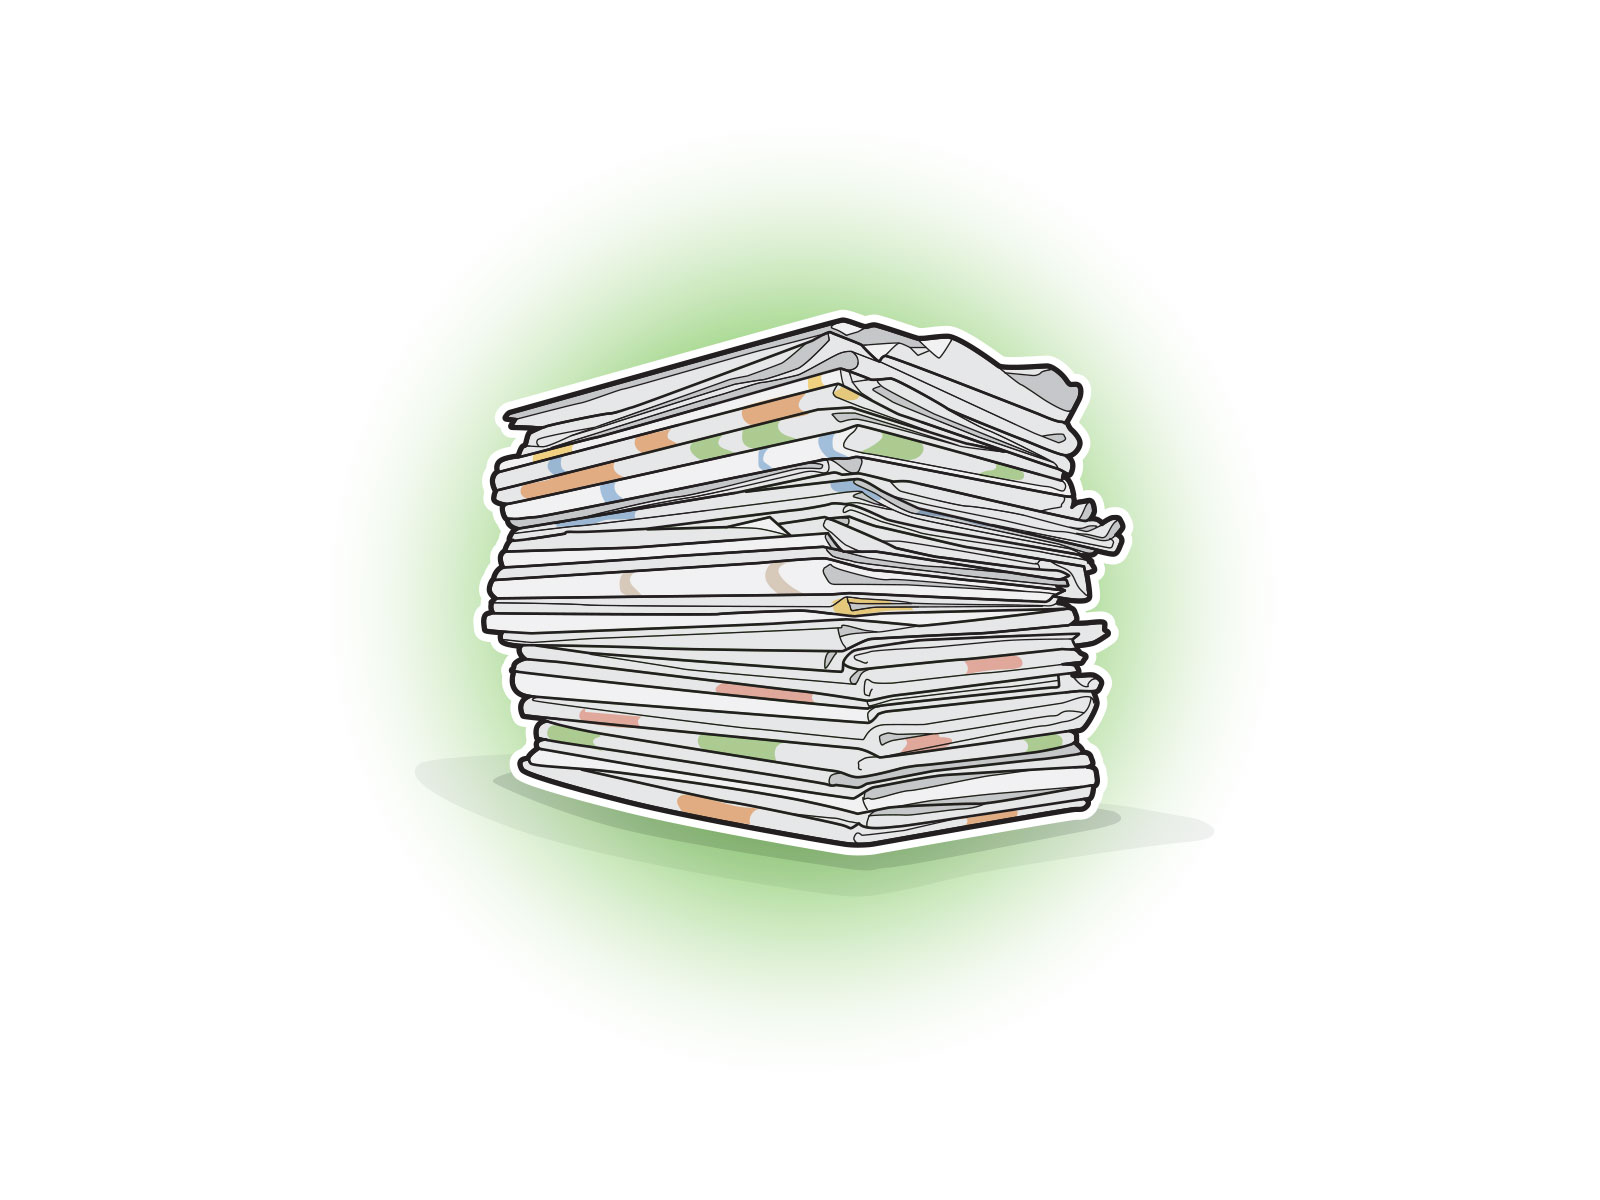 Stylised vector icon illustration of a pile of newspaper for recycling